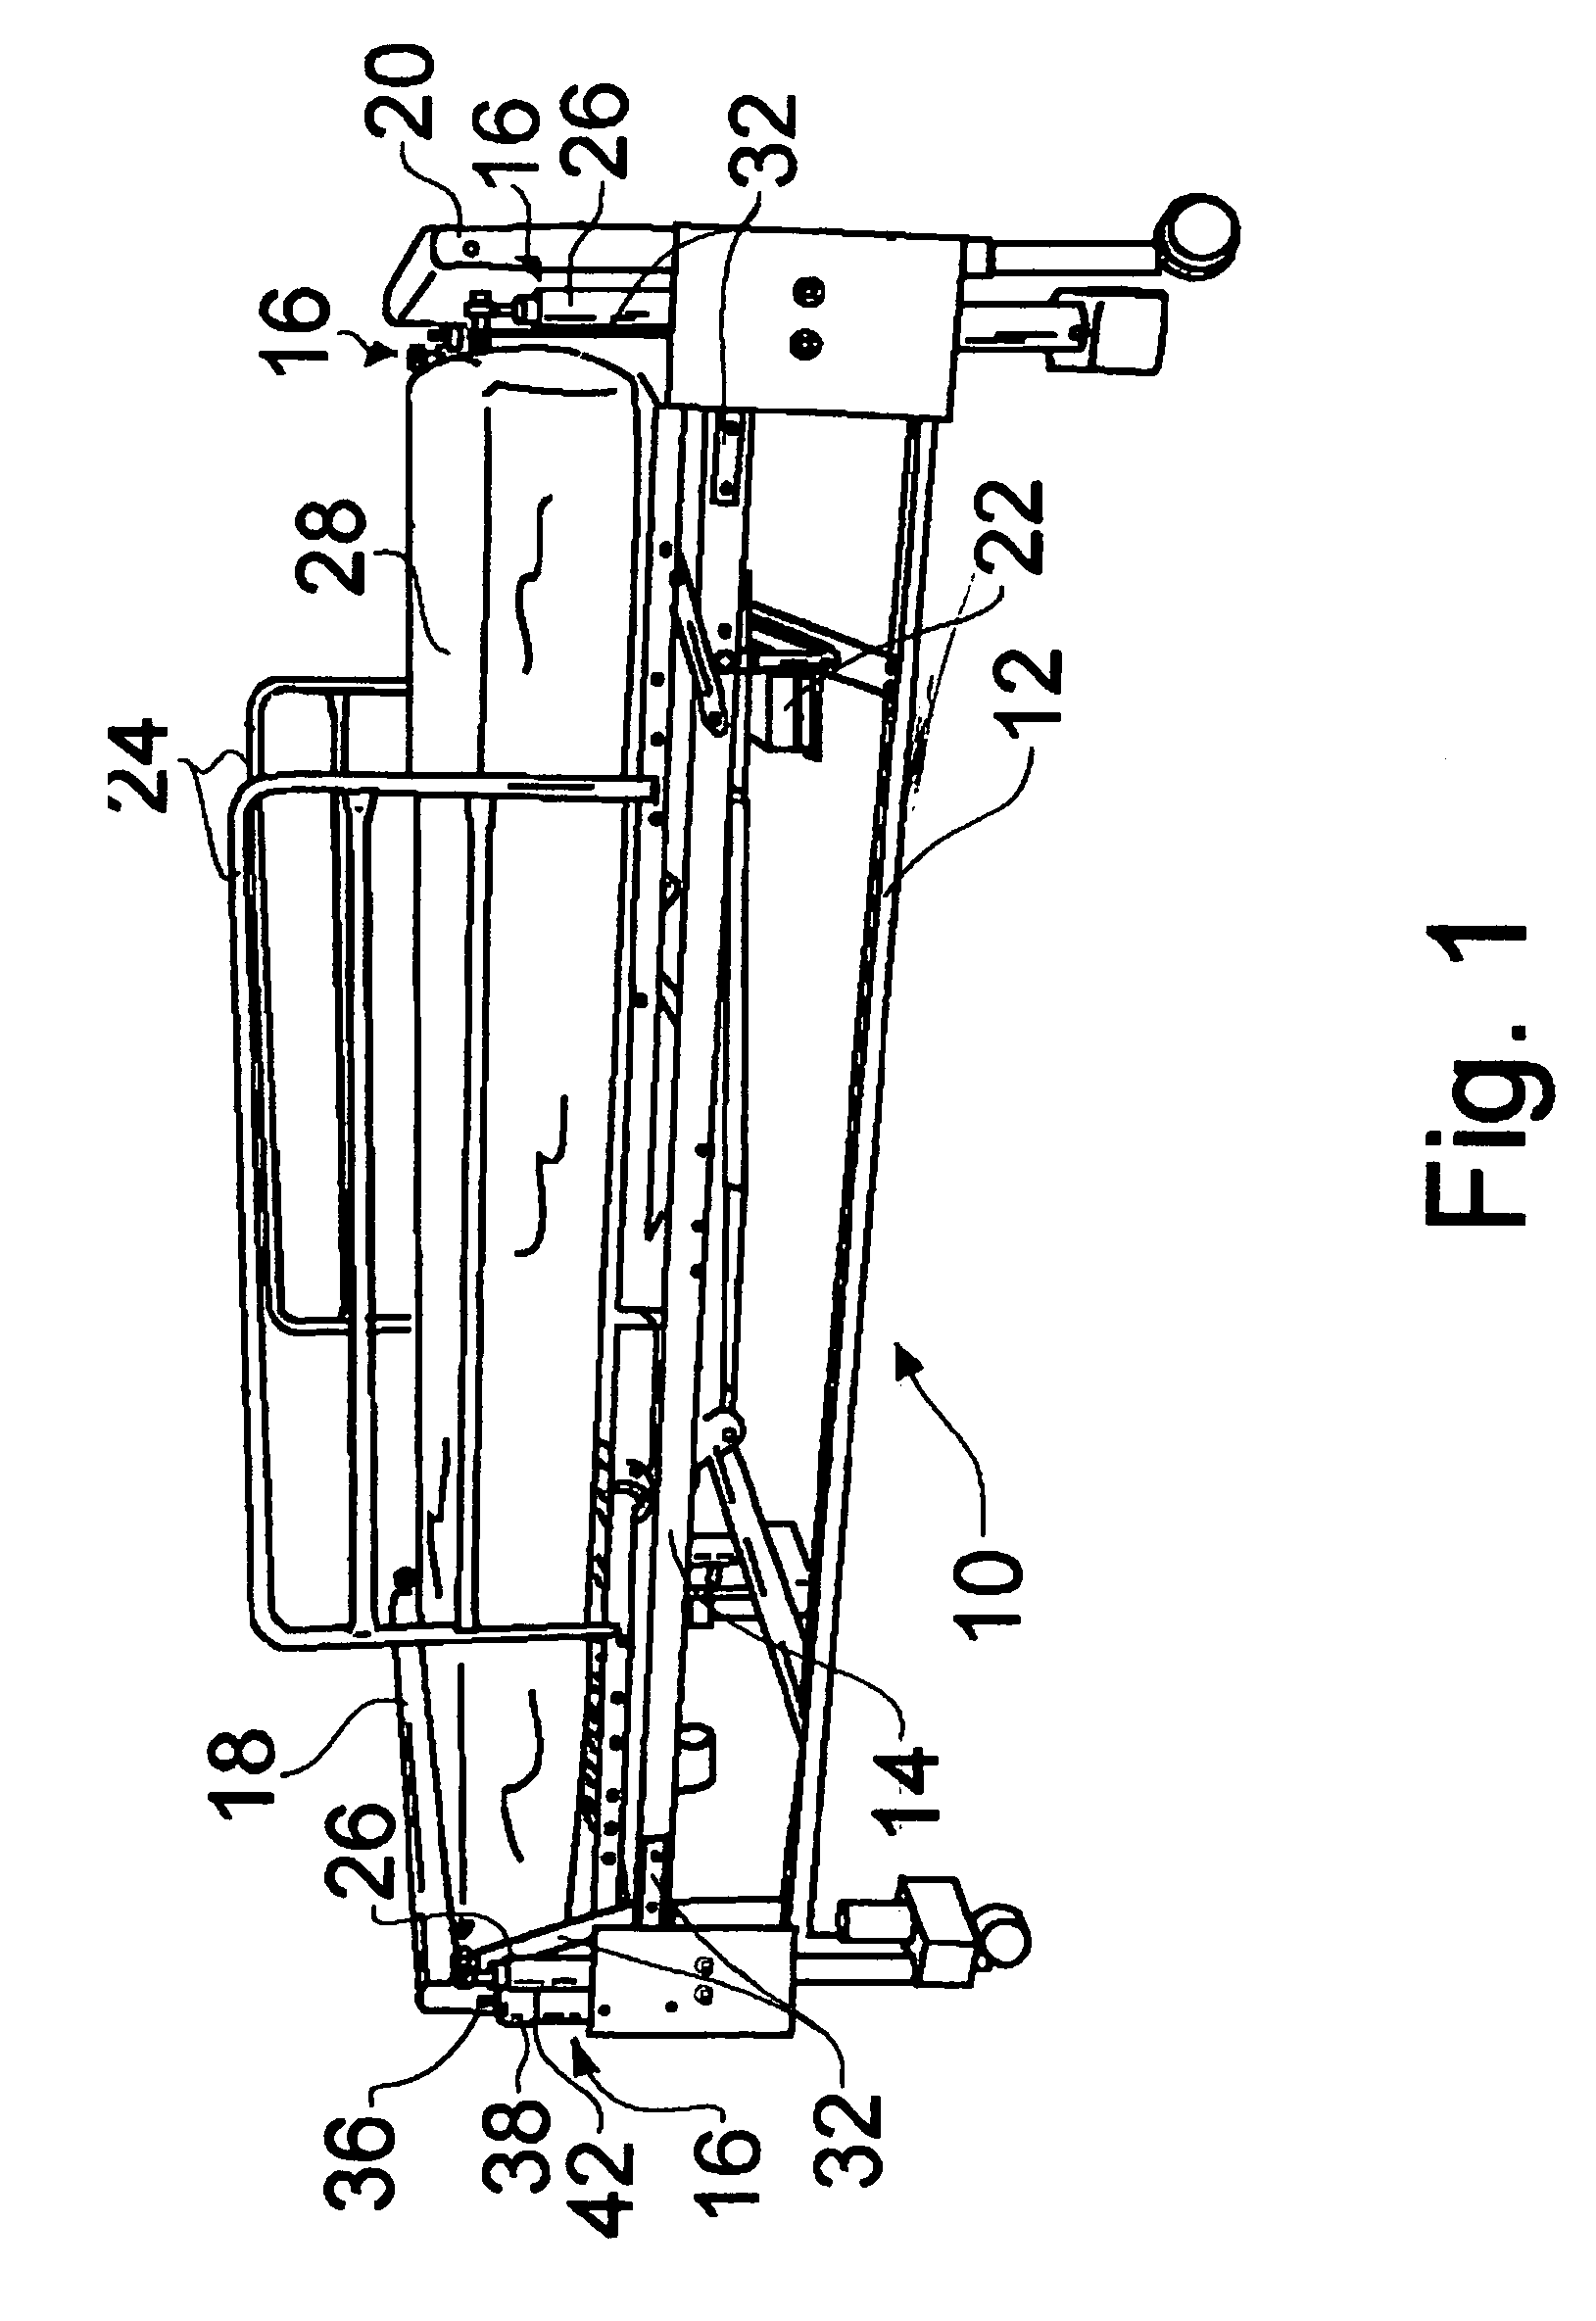 Adjustable bed and methods thereof